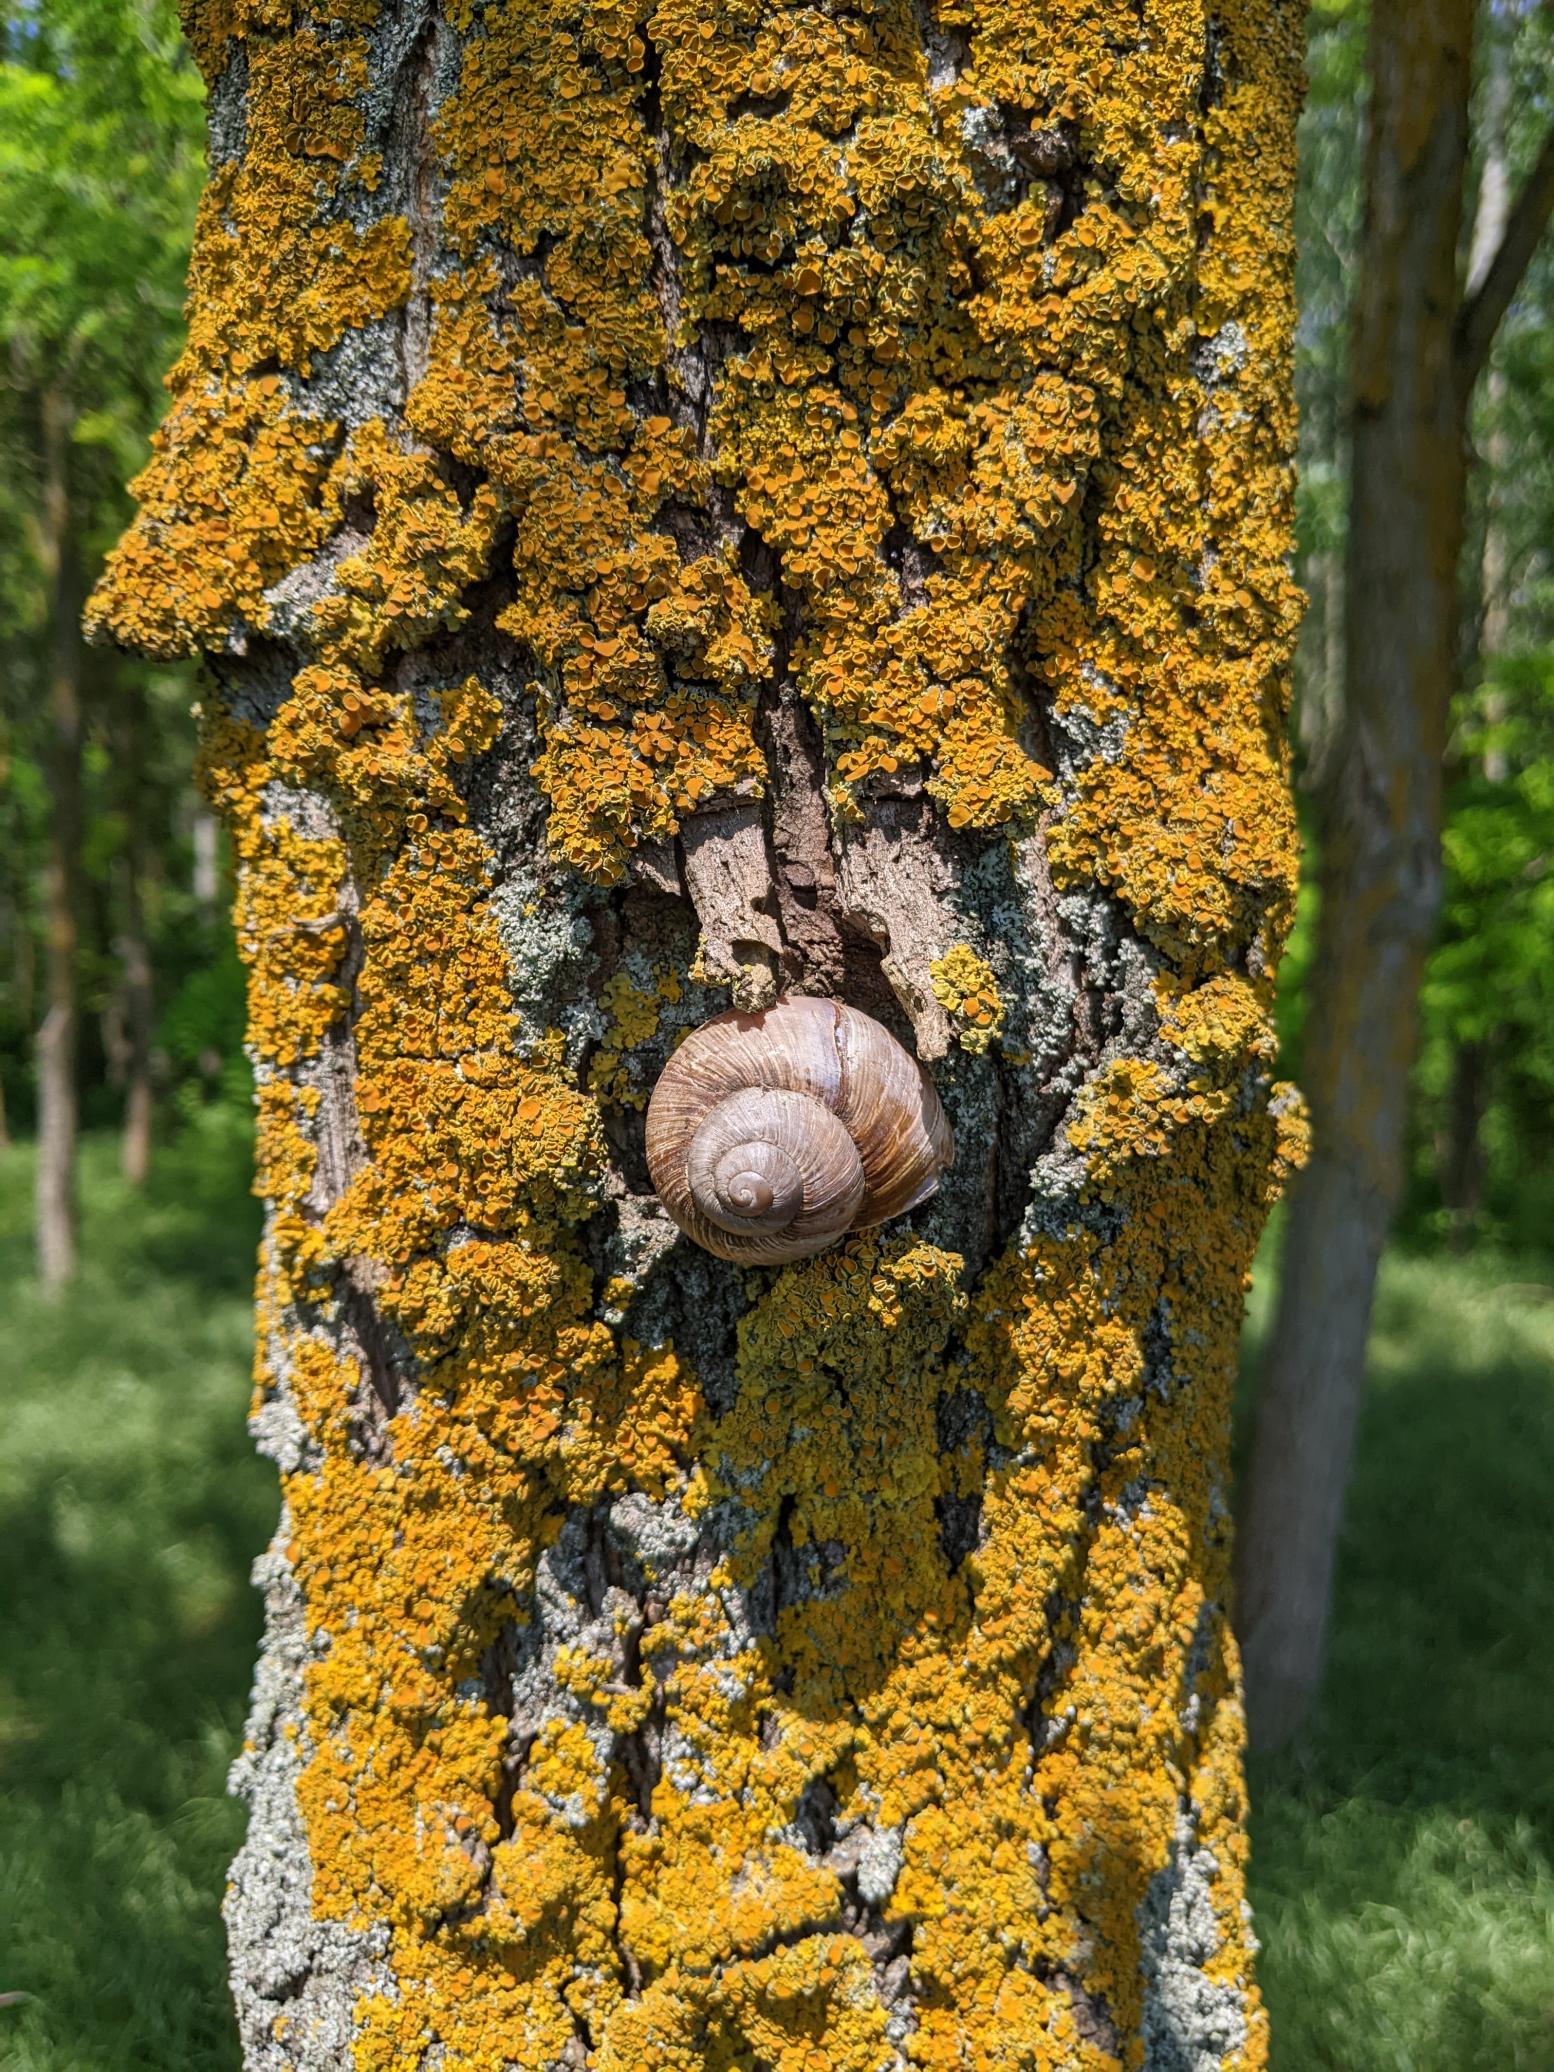 Alina Karapandzich: Excavation pee breaks in the woods are made immensely more enjoyable when you have beautiful wooded areas nearby with cute snails to take pictures of! Location: the Great Hungarian Plain